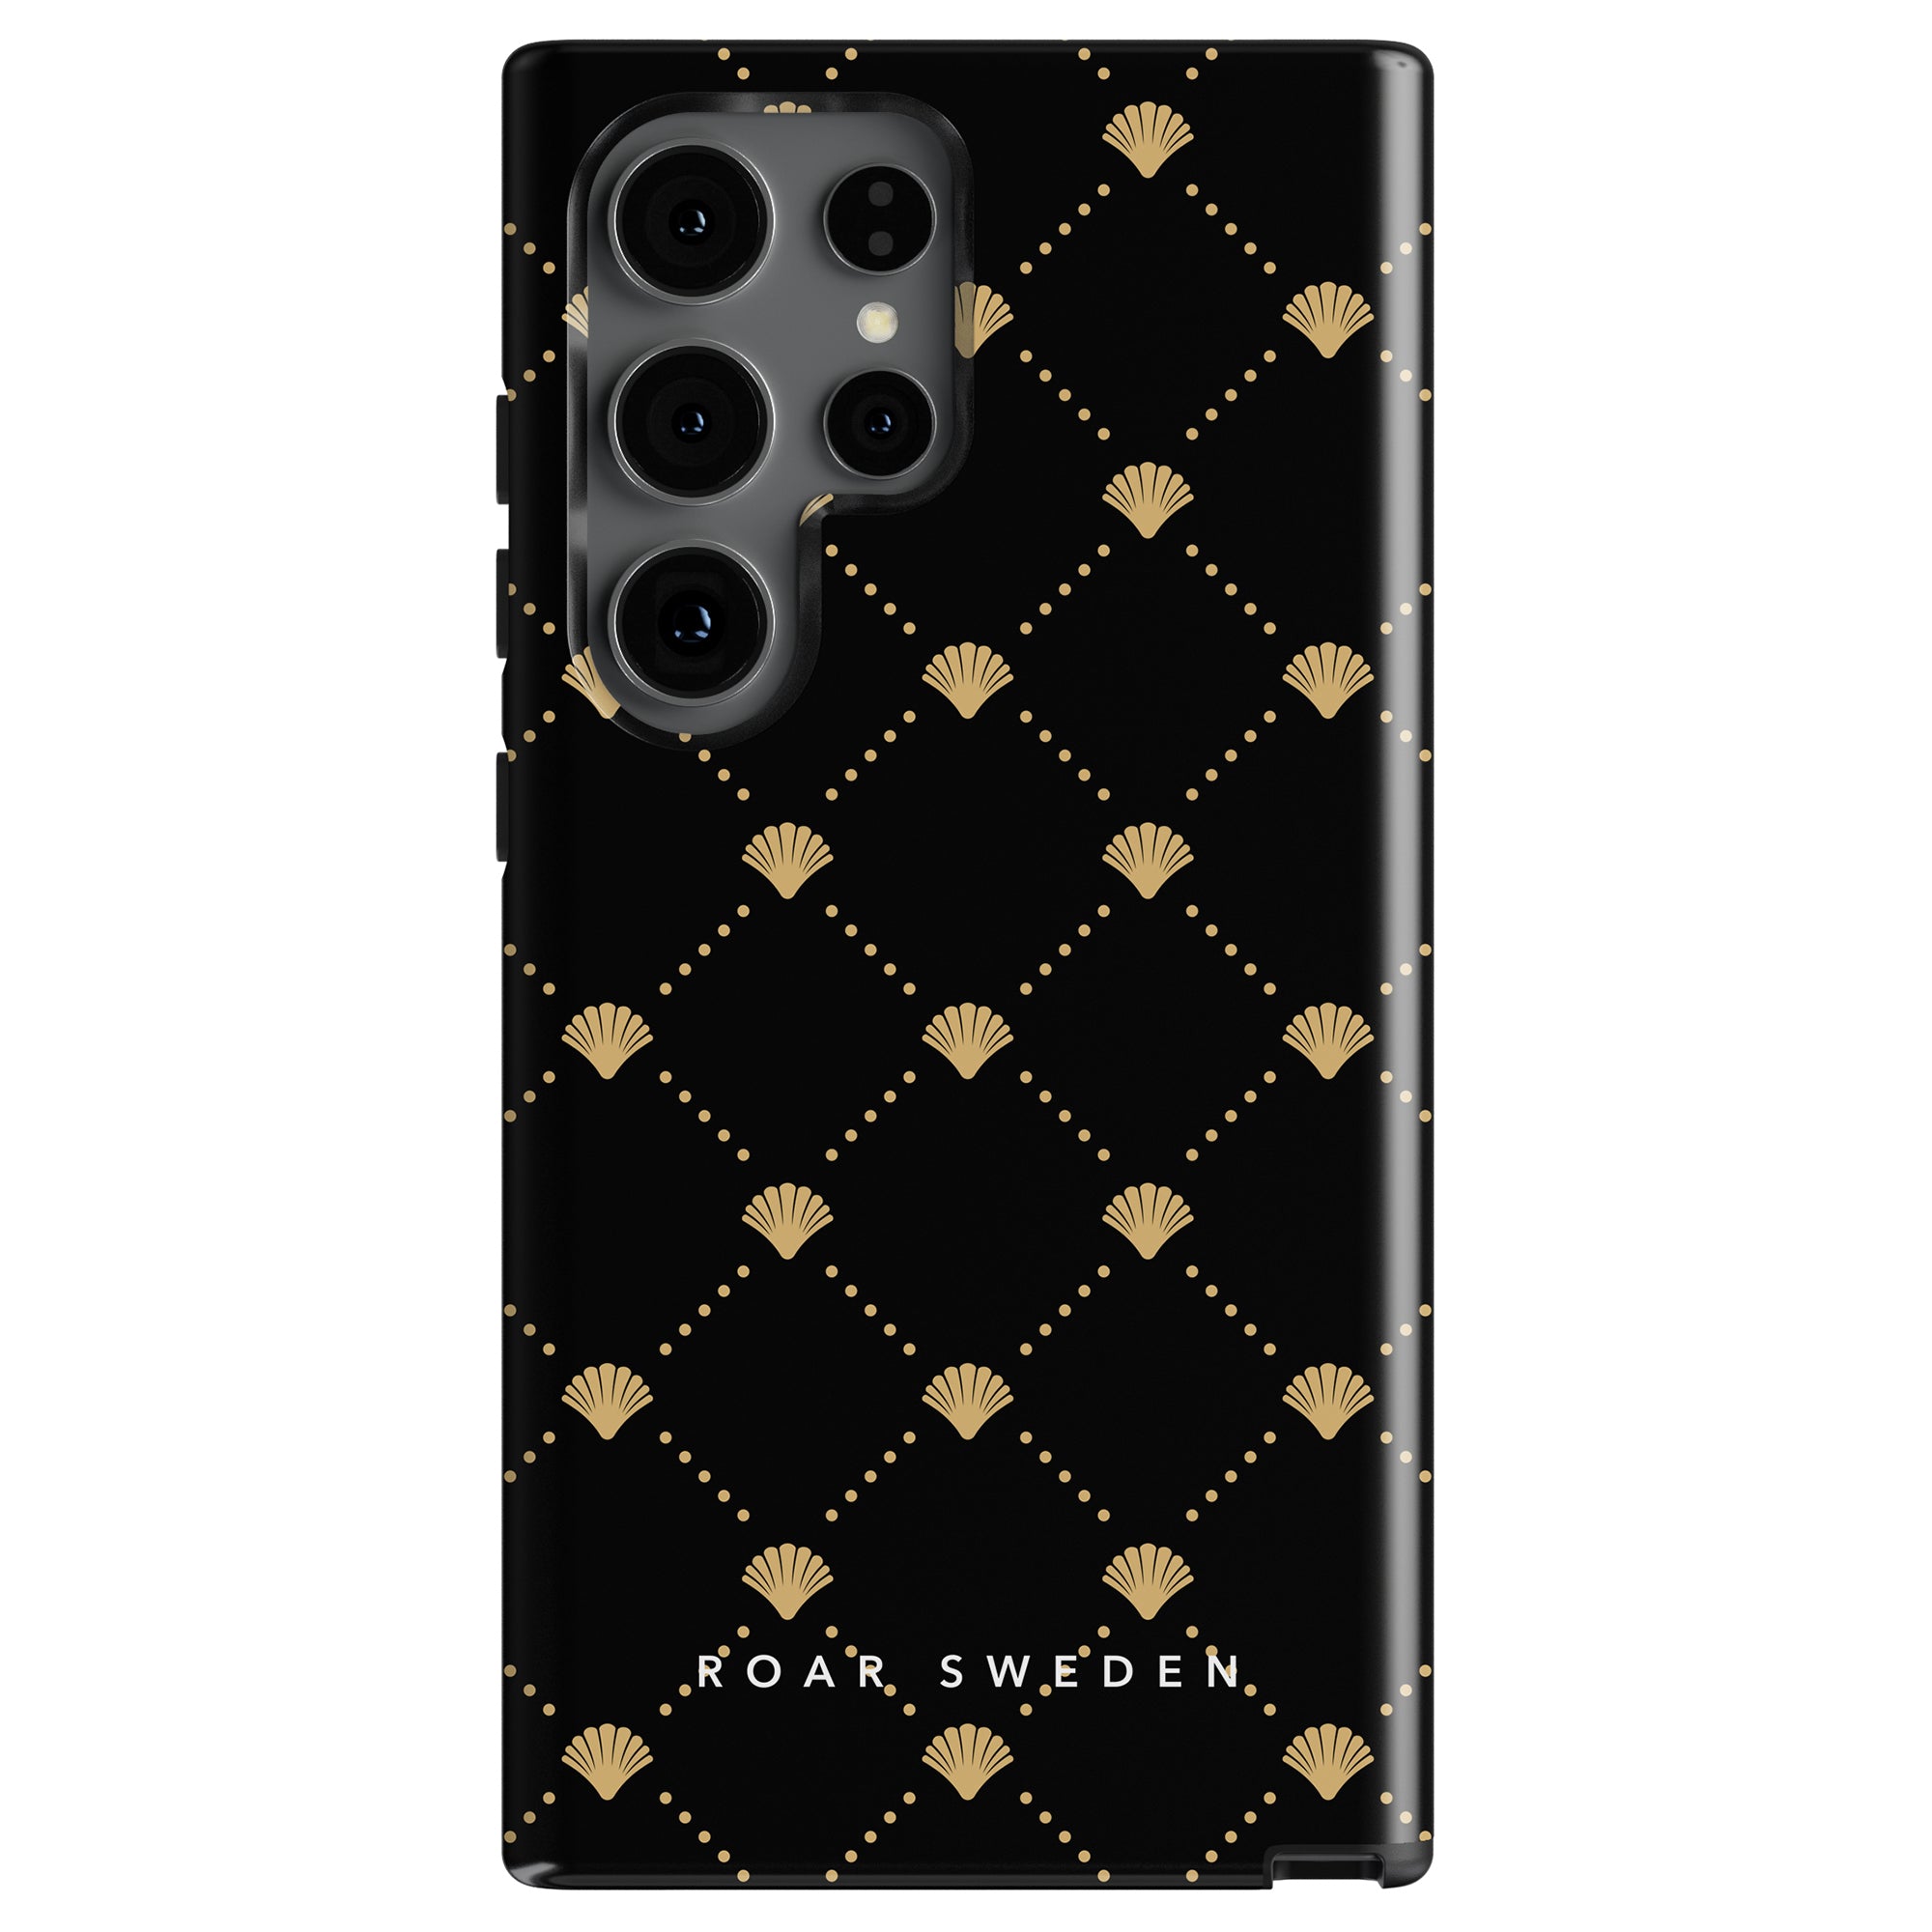 Introducing the Luxe Shells Black - Tough Case, featuring a gold geometric pattern and the text "ROAR SWEDEN" at the bottom. This tough case is part of our exclusive Ocean Collection.